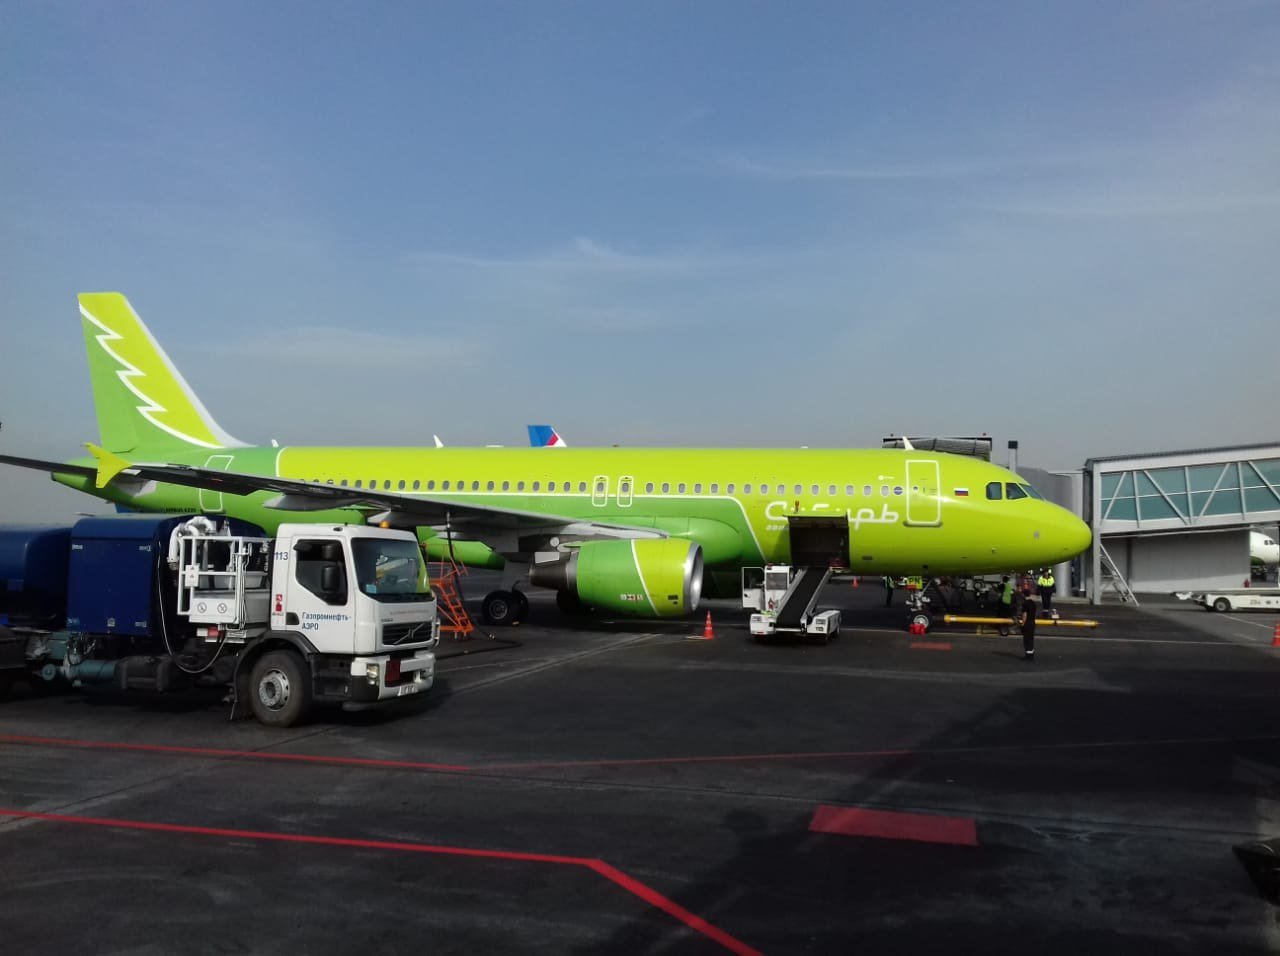 S7 airlines сибирь. S7 Airlines ливрея Сибирь. Самолеты s7 Airlines Новосибирск. S7 Airlines Толмачево. A320 s7 Сибирь.